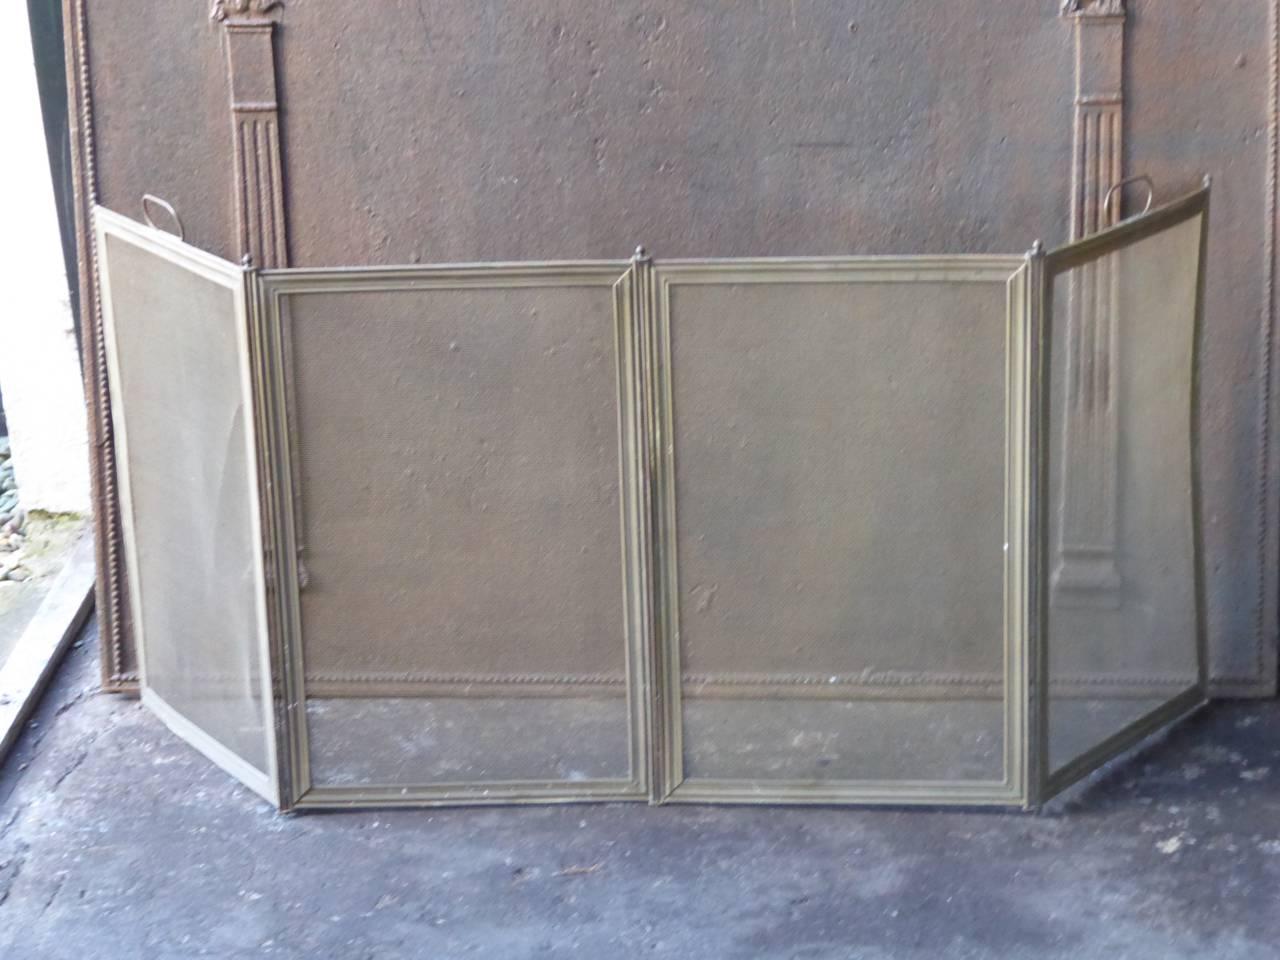 20th century French fire screen made of iron and iron mesh.